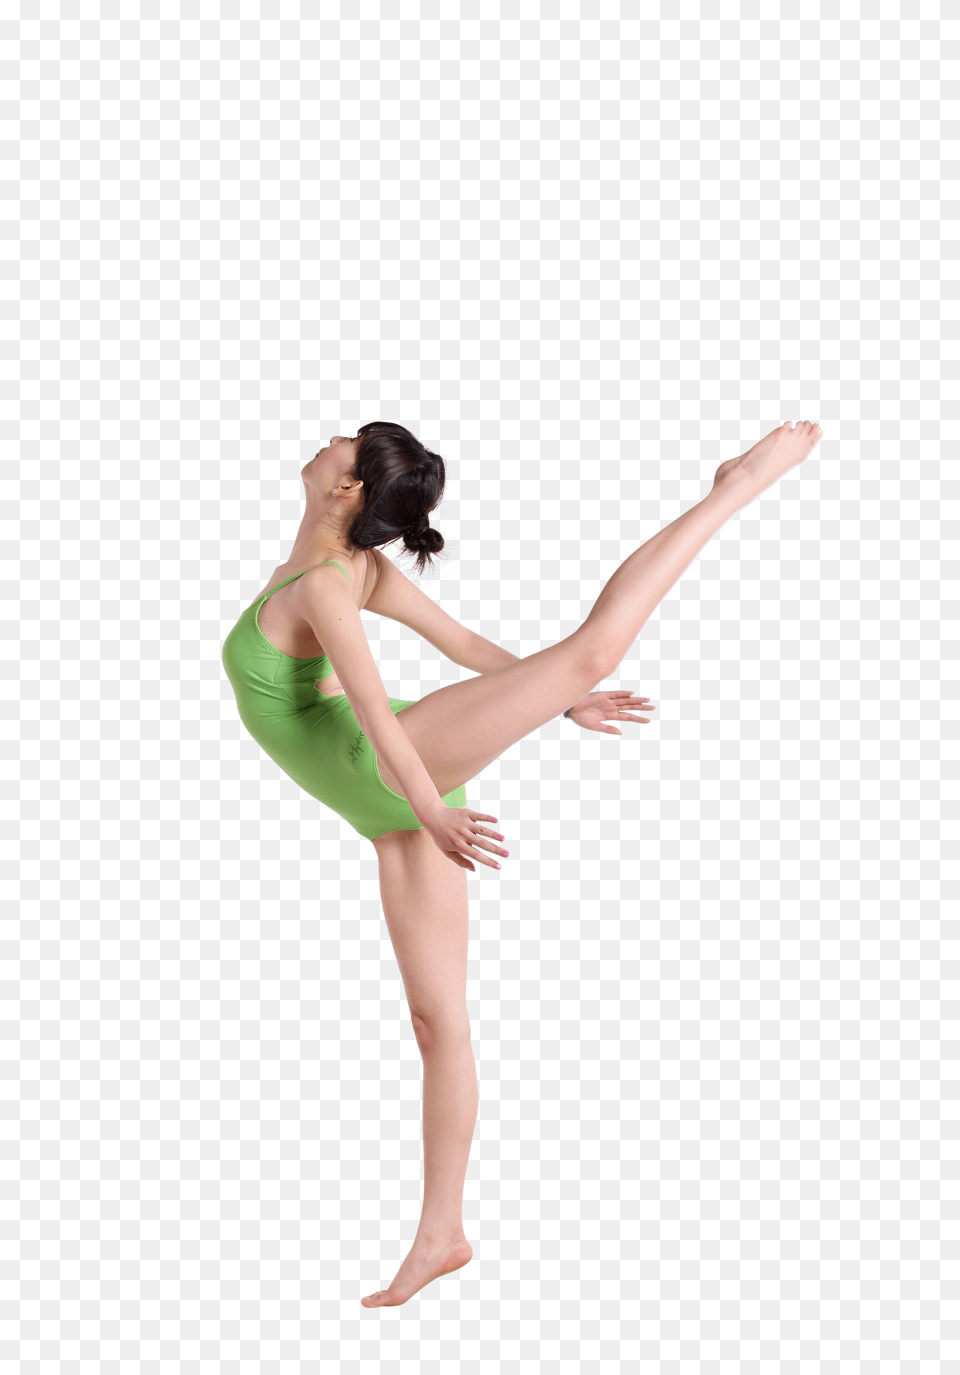 Dance Dancing Couple Arts Show People, Adult, Female, Leisure Activities, Person Png Image